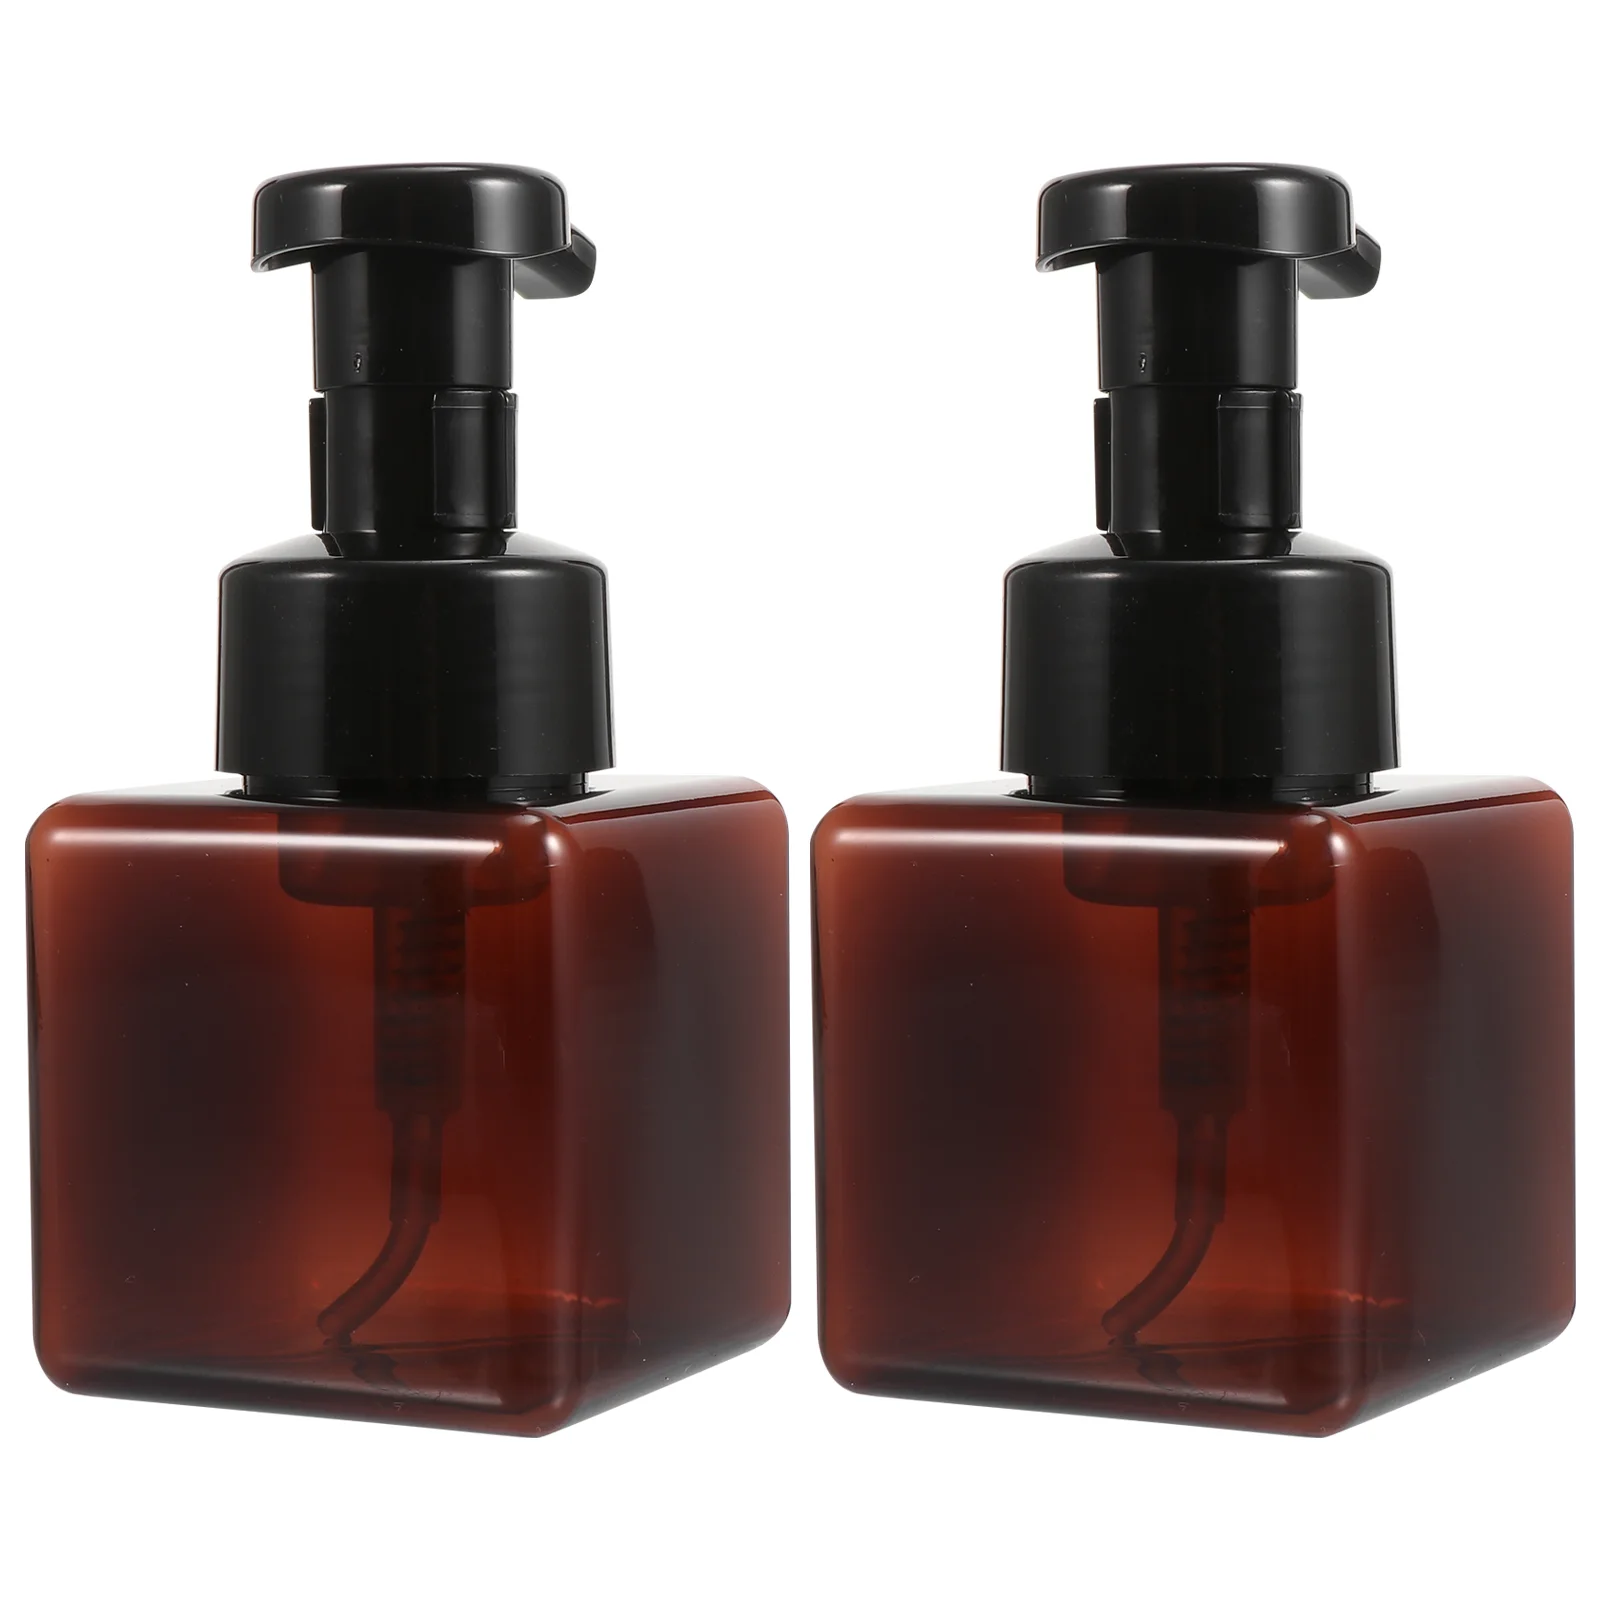 Hand Soap Dispenser Foaming Hand Bottle: 2pcs 250ml Lotion Cleanser Dispenser Pump Container for Bathroom Vanities Kitchen Brown free shipping classic style solid brass brushed nickle kitchen sink countertop liquid dish hand soap dispenser pump replacement